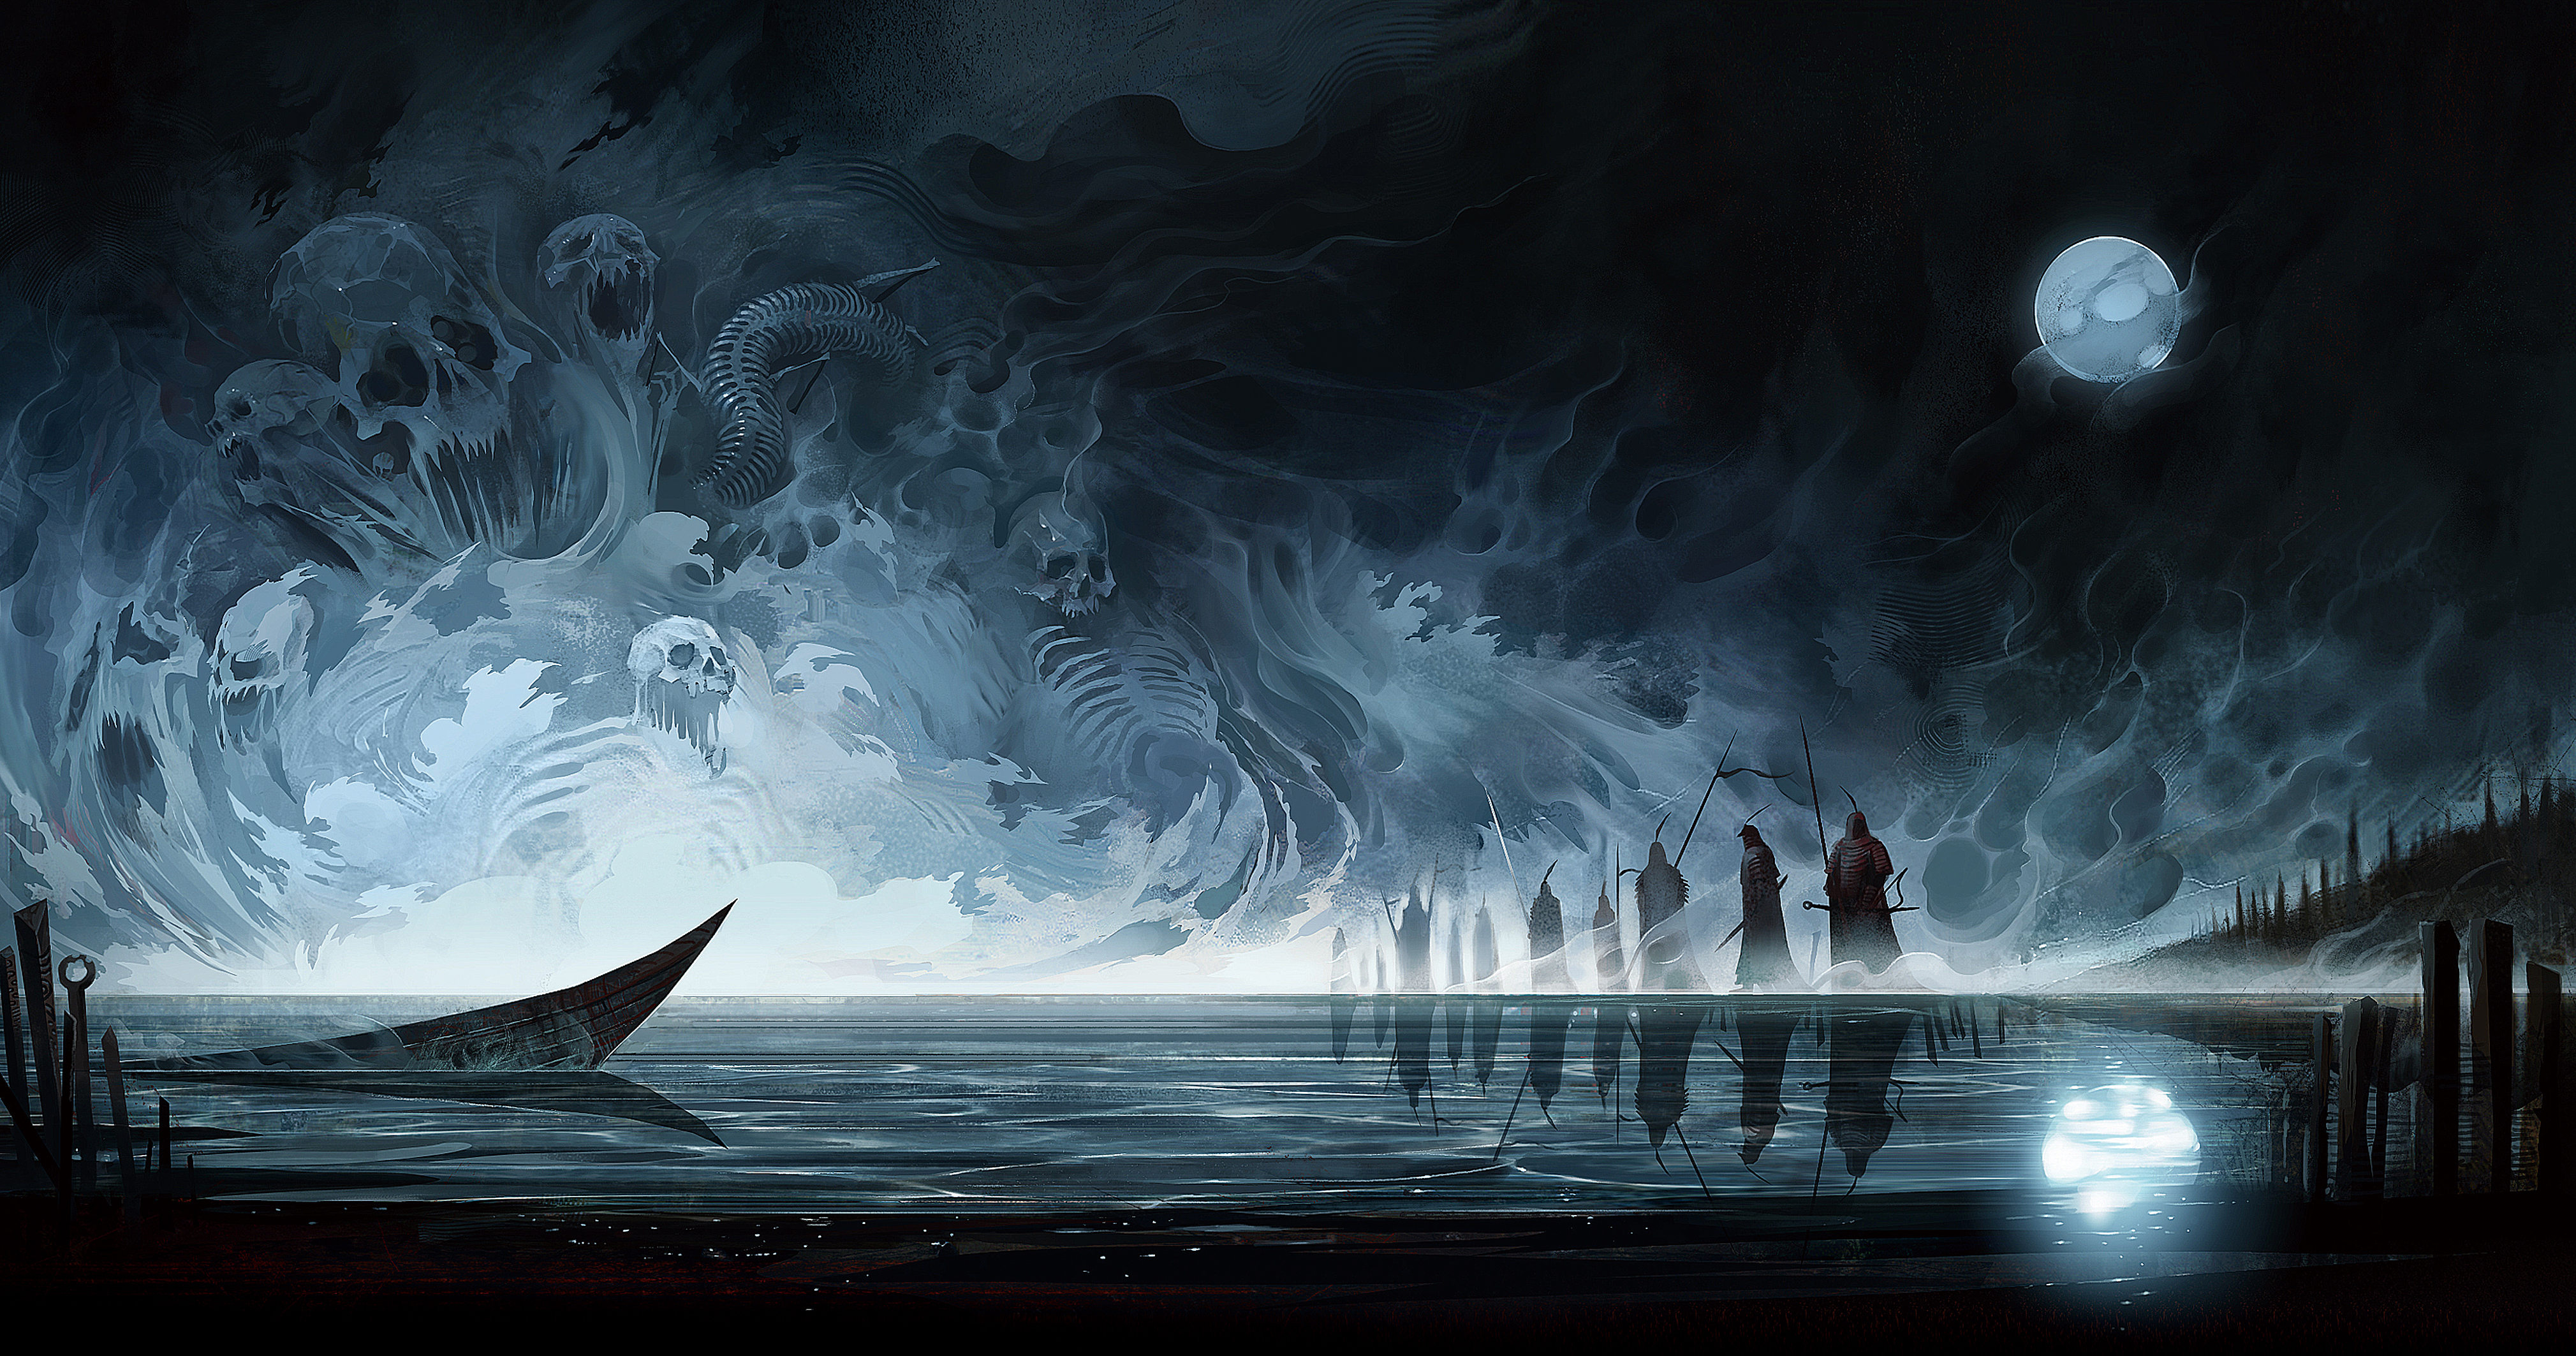 Fantasy Art Hell Reflection Boat Spirit Soul Moon Hungry Ghosts